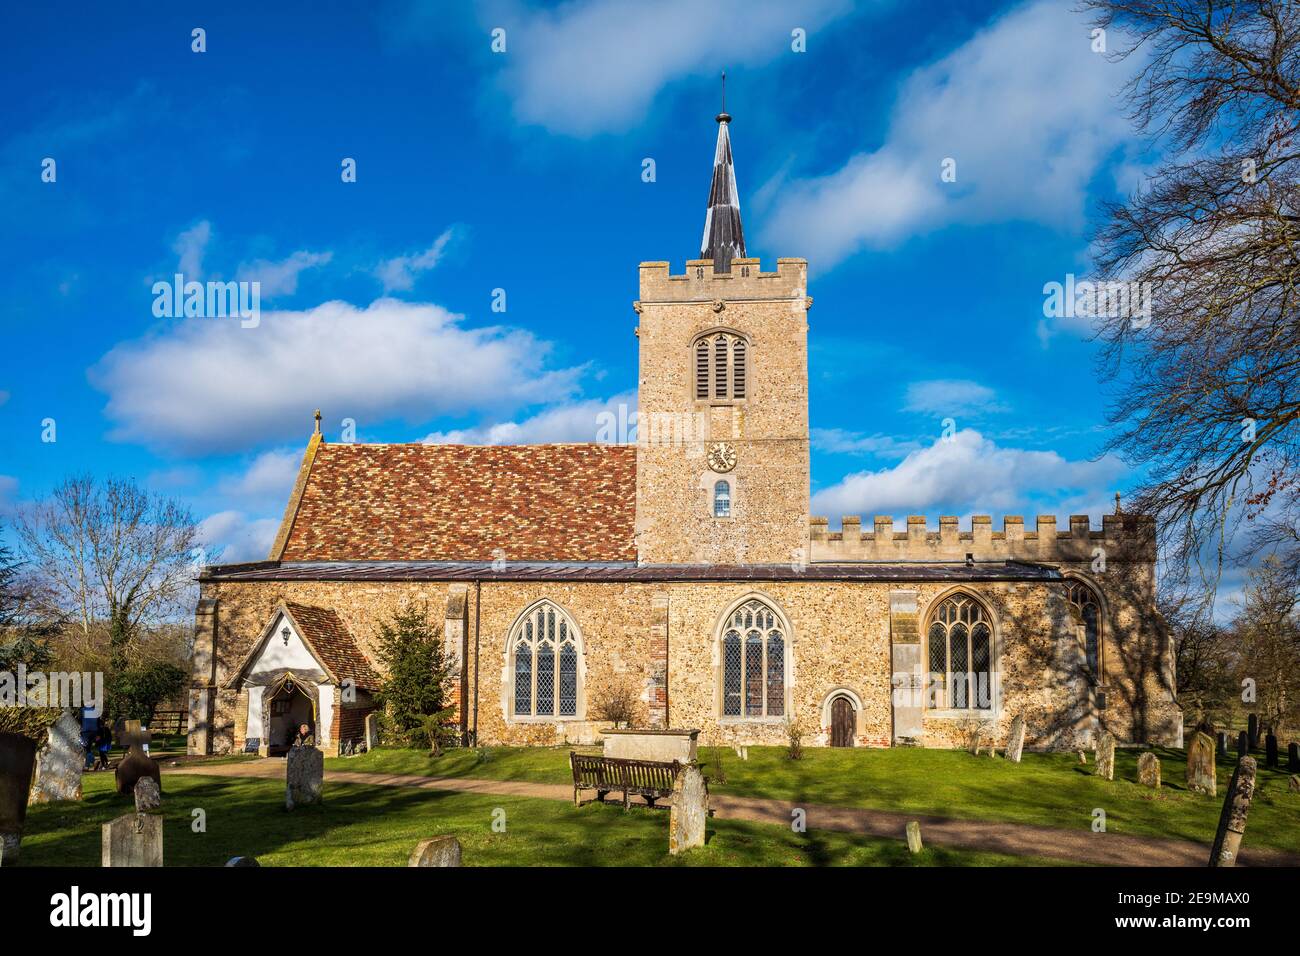 Whittlesford Church. St Mary and St Andrew’s Church Whittlesford Cambridge - first recorded from 1217 but with parts believed to be much earlier. Stock Photo